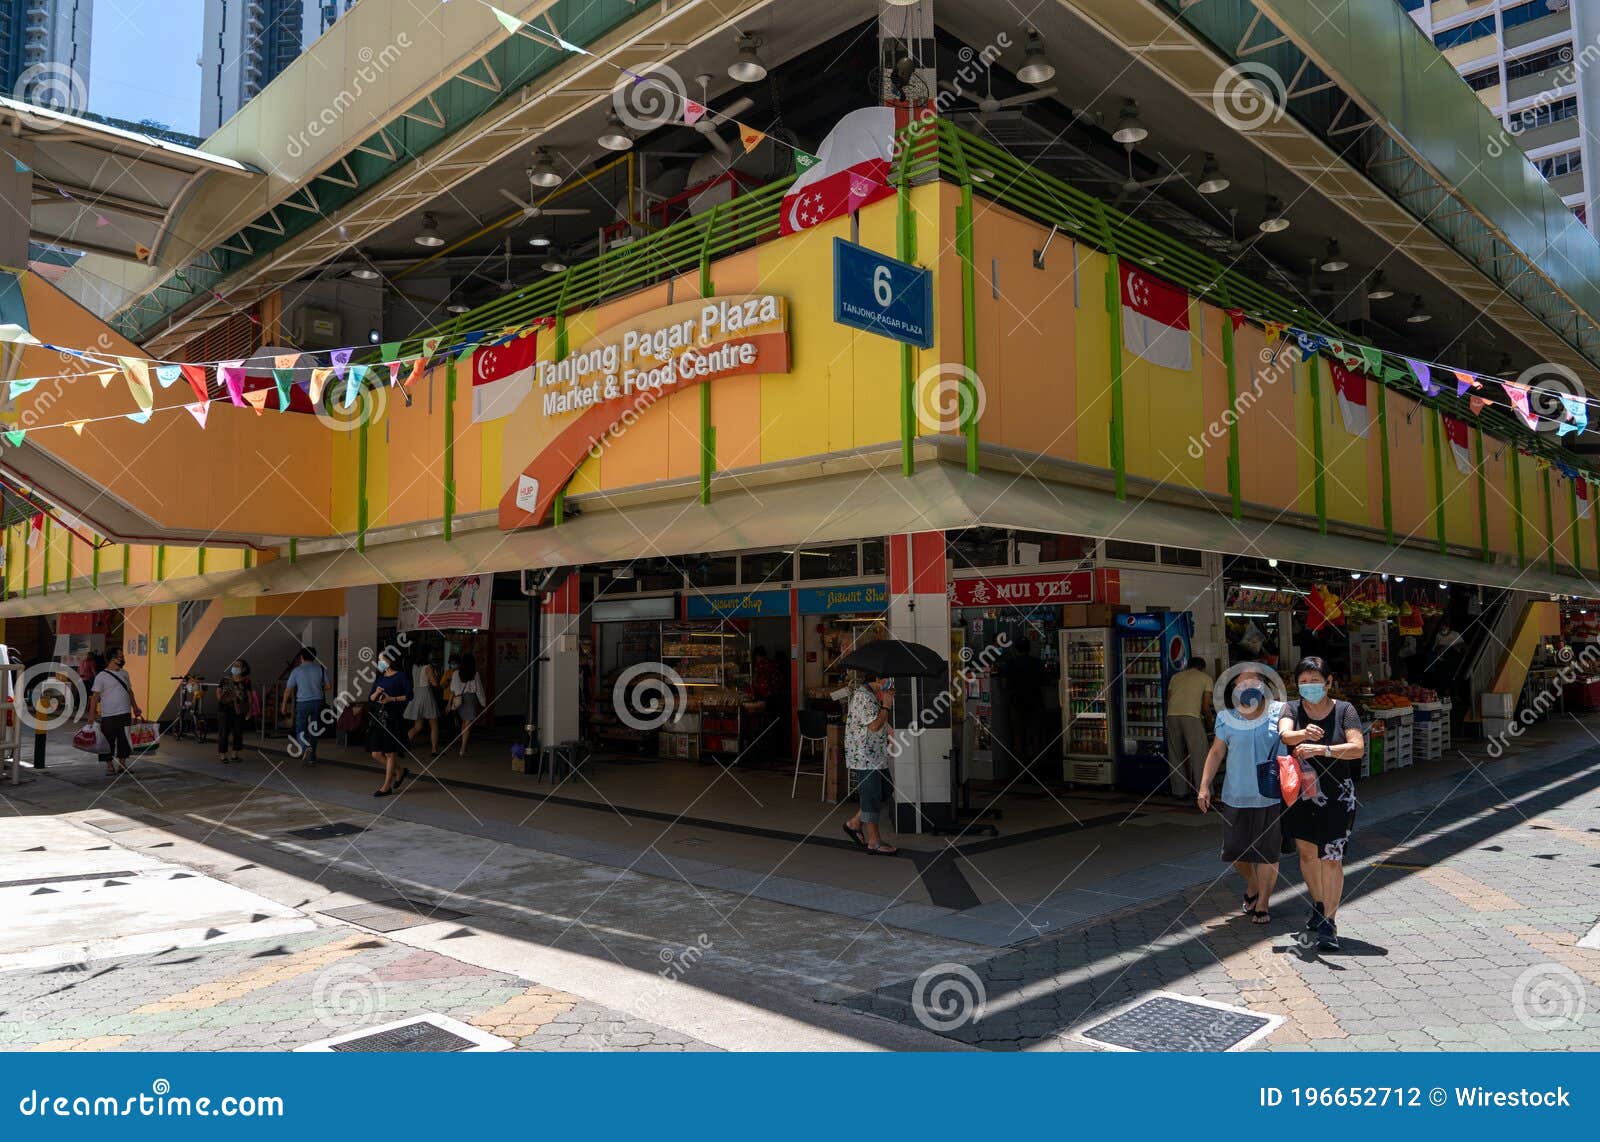 People Outside Tanjong Pagar Plaza Market And Food Centre Editorial Photography Image Of